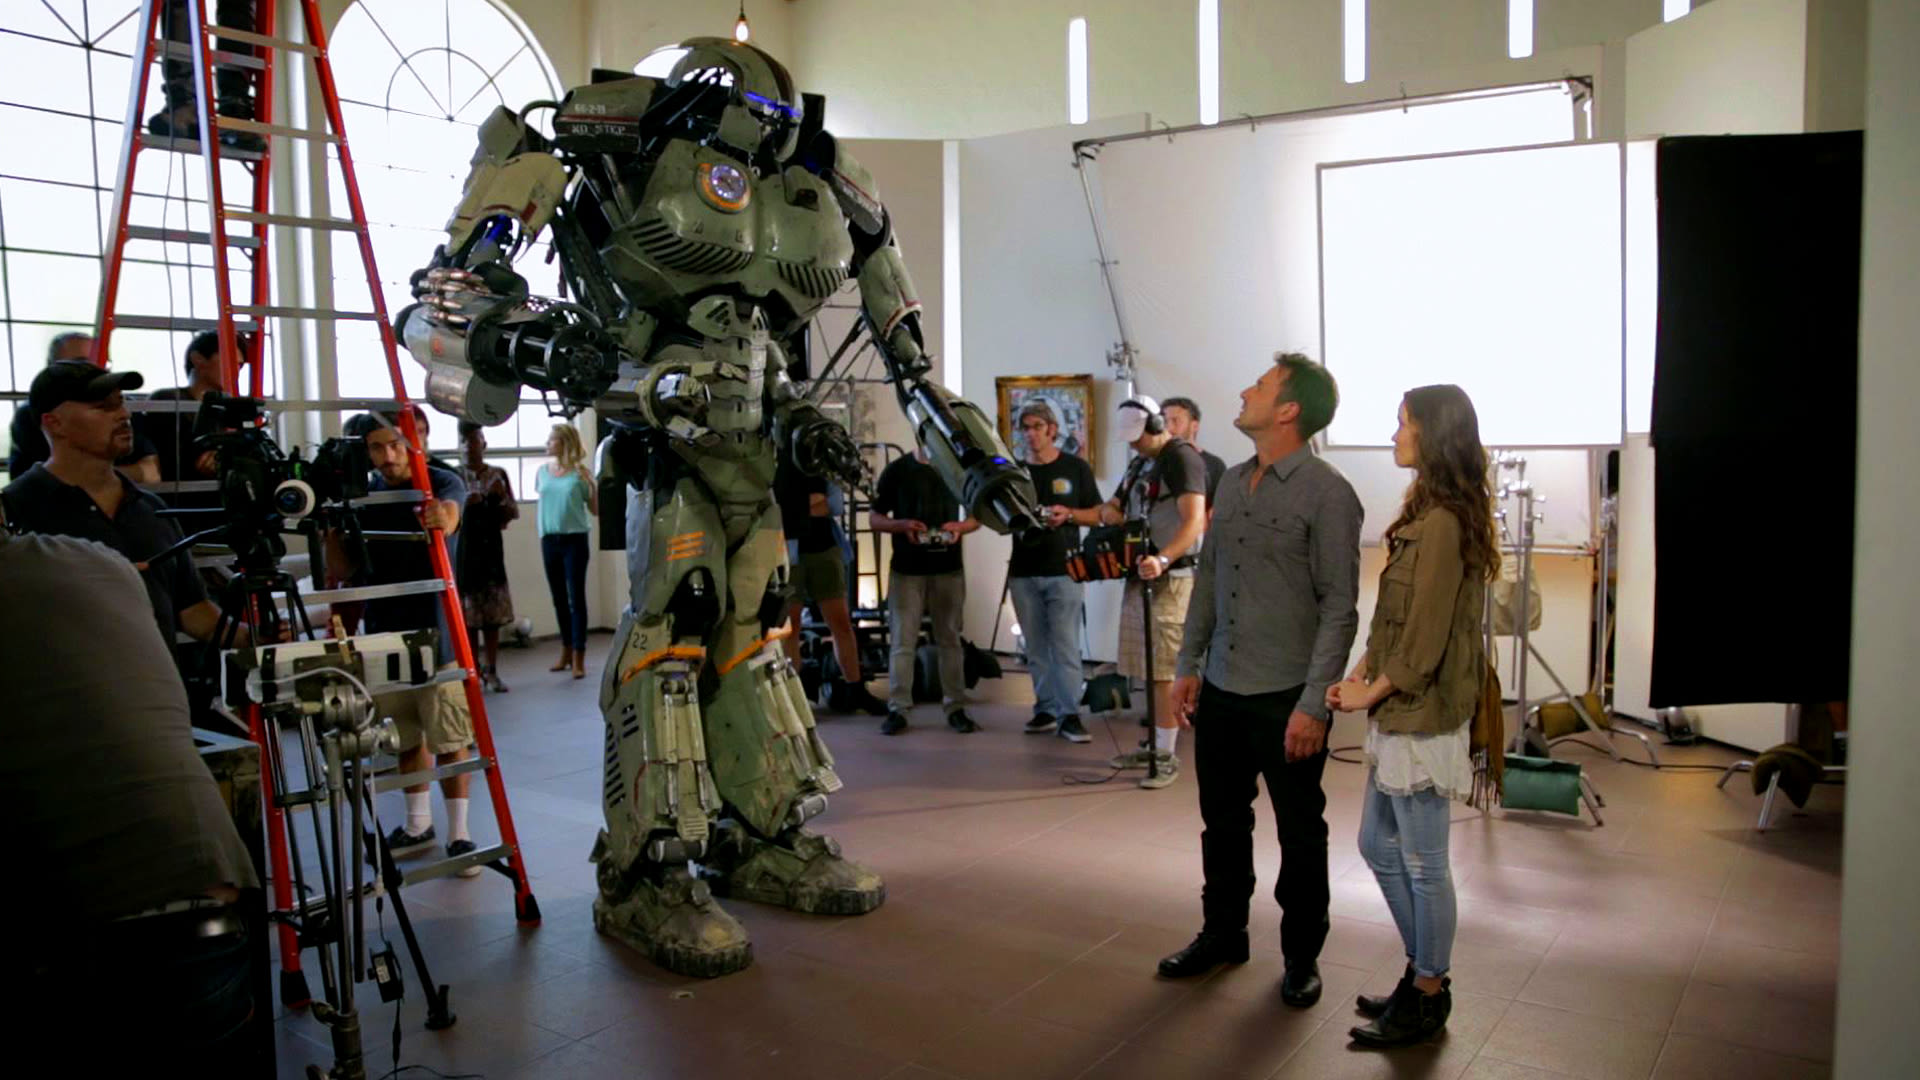 Watch Behind the Scenes of Summer Glau's Robot Series | 1000 | WIRED